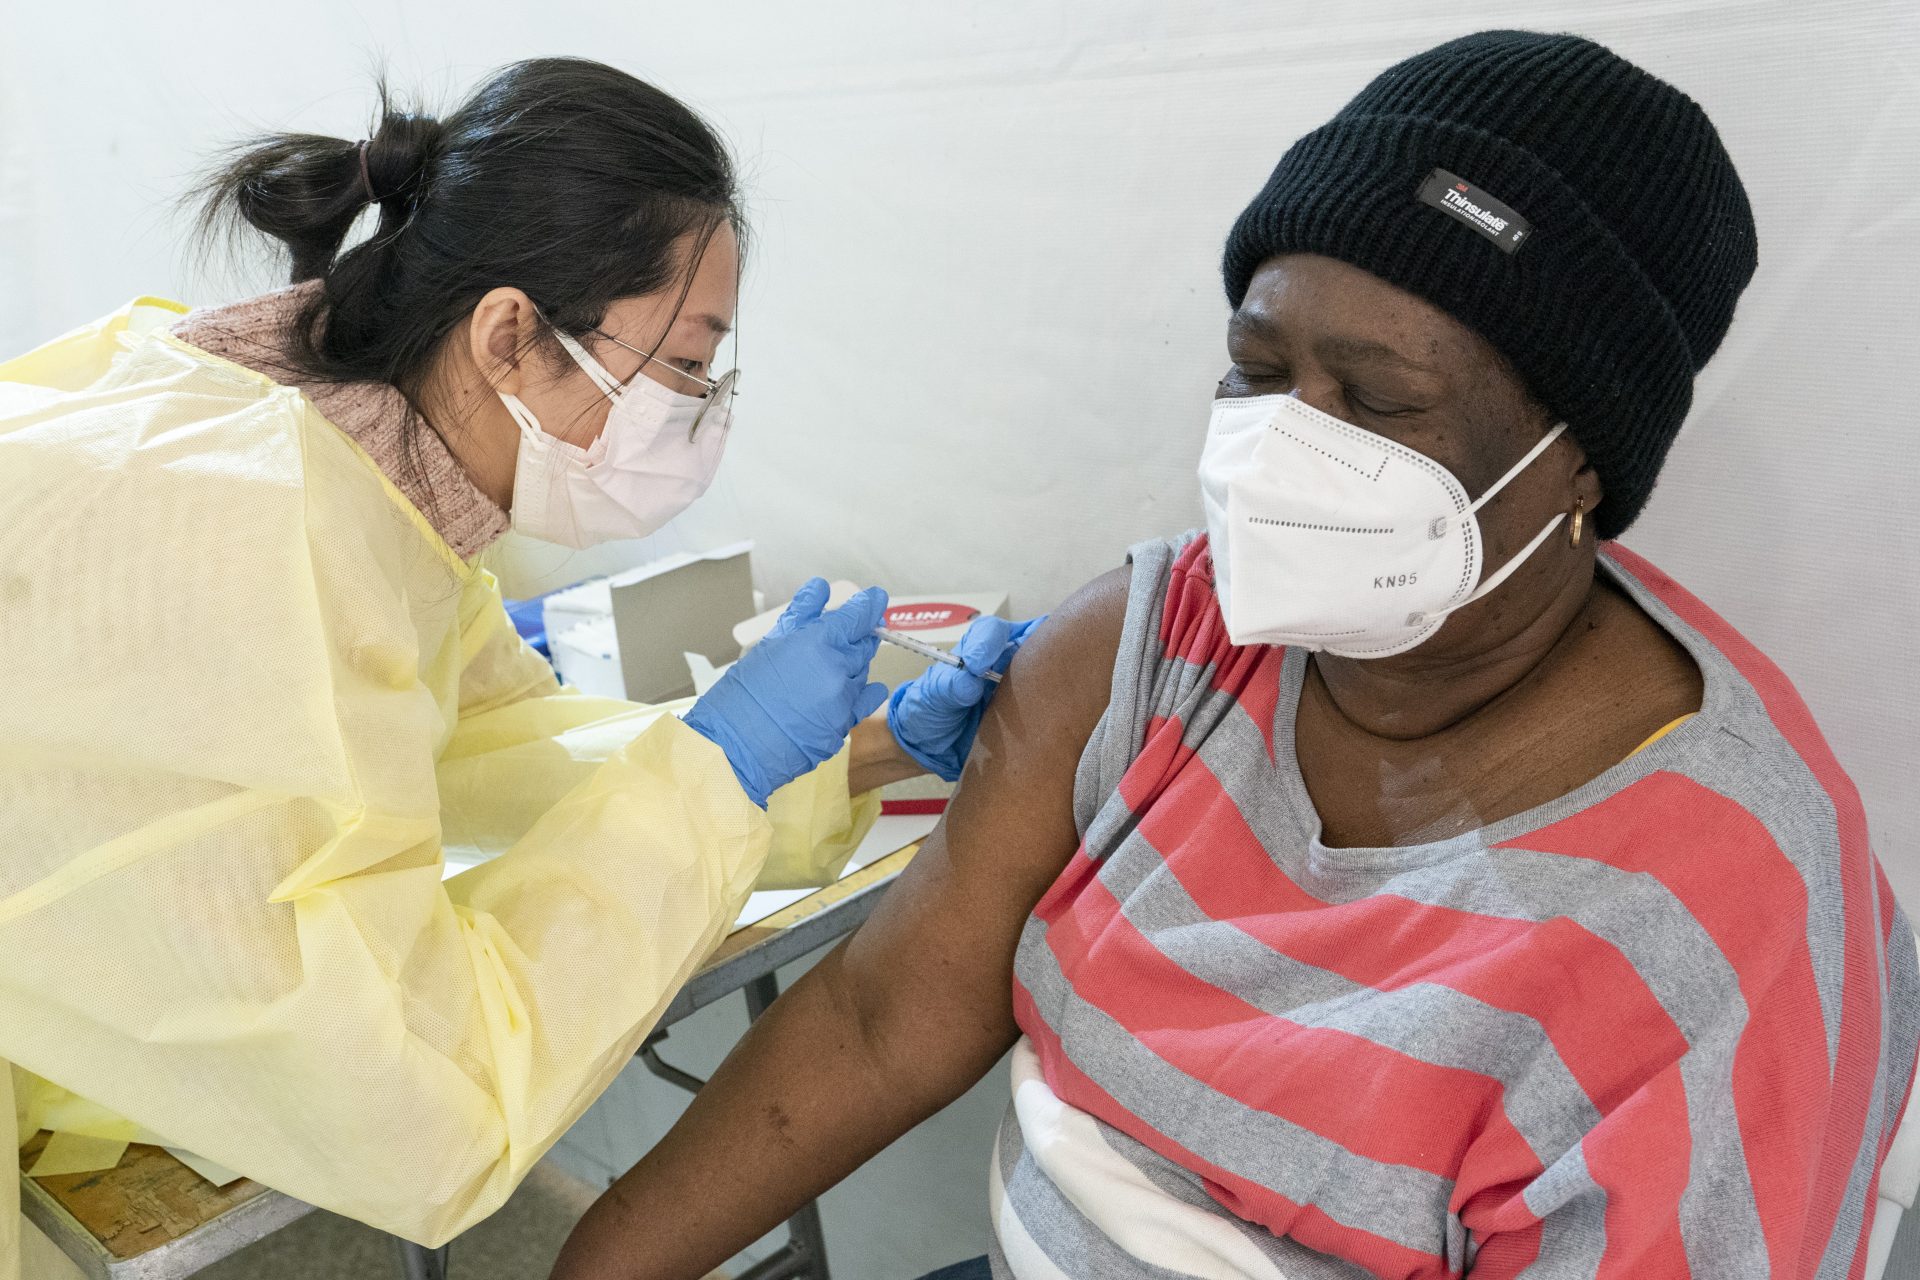 Registered Nurse Shyun Lin, left, administers Alda Maxis, 70, the first dose of the COVID-19 vaccine at a pop-up vaccination site in the William Reid Apartments in Brooklyn, N.Y., on Jan. 23.